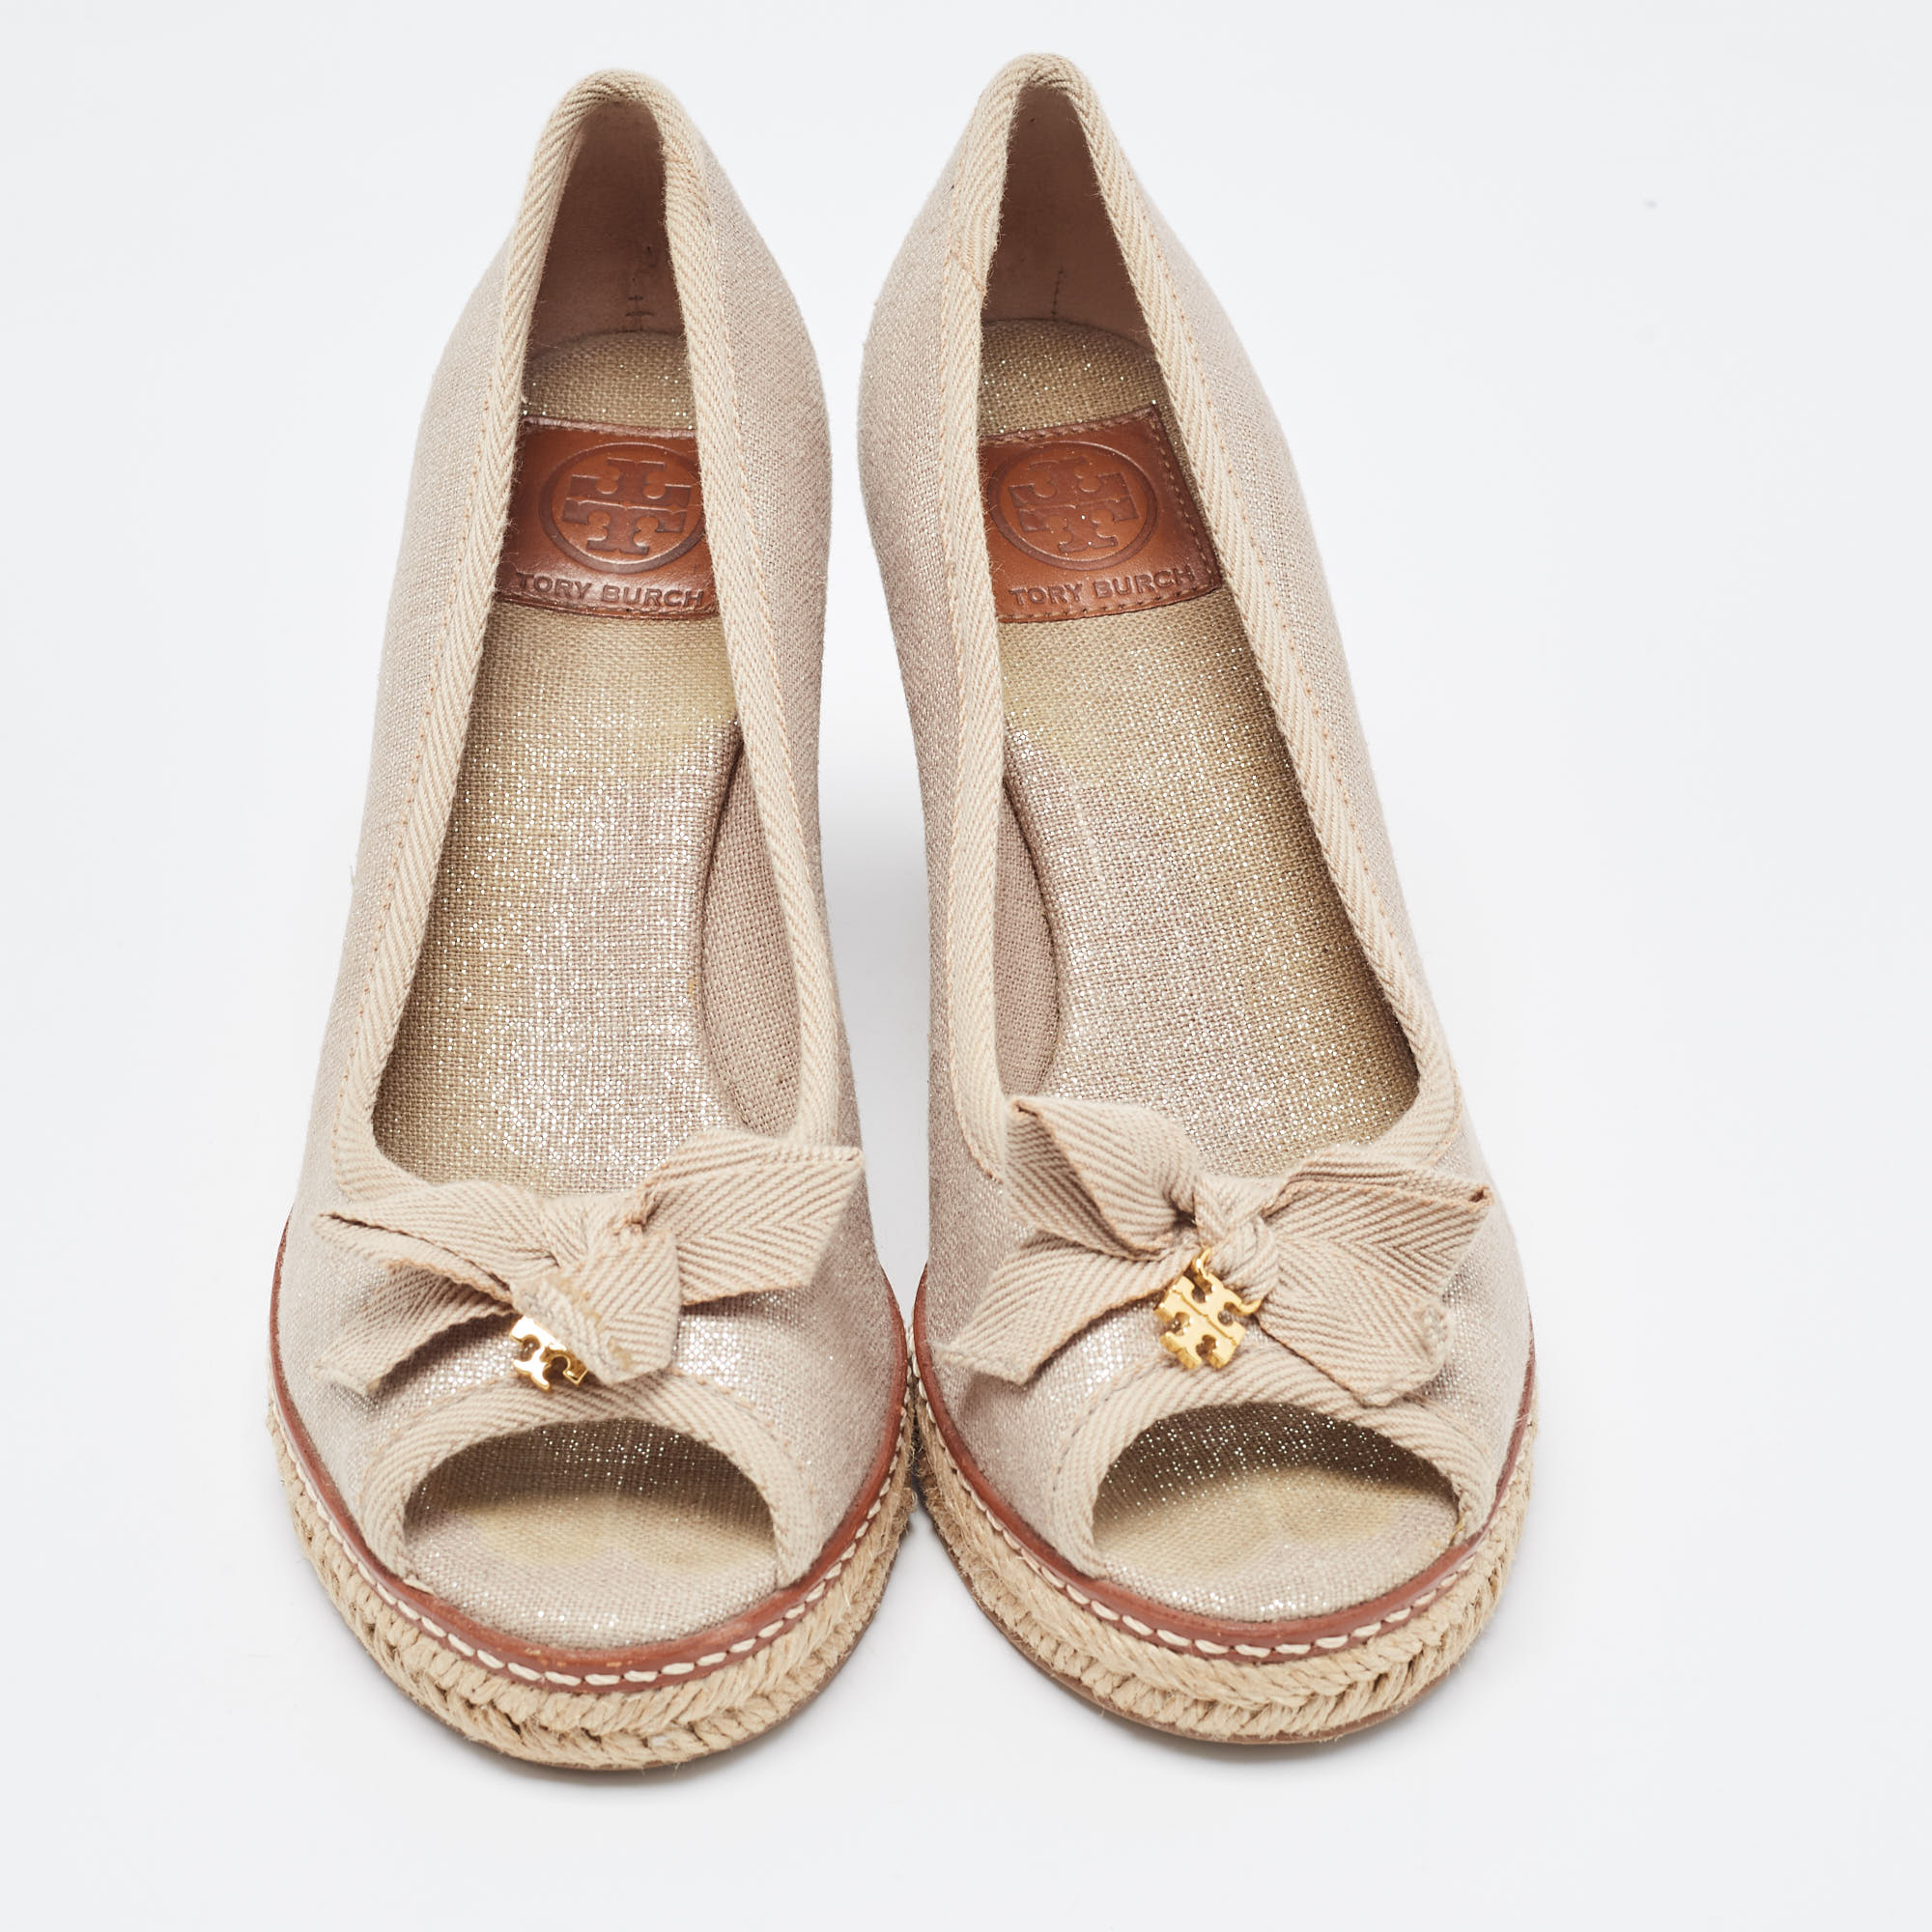 Tory Burch Grey Canvas Jackie Bow Espadrille Wedge Pumps Size 37